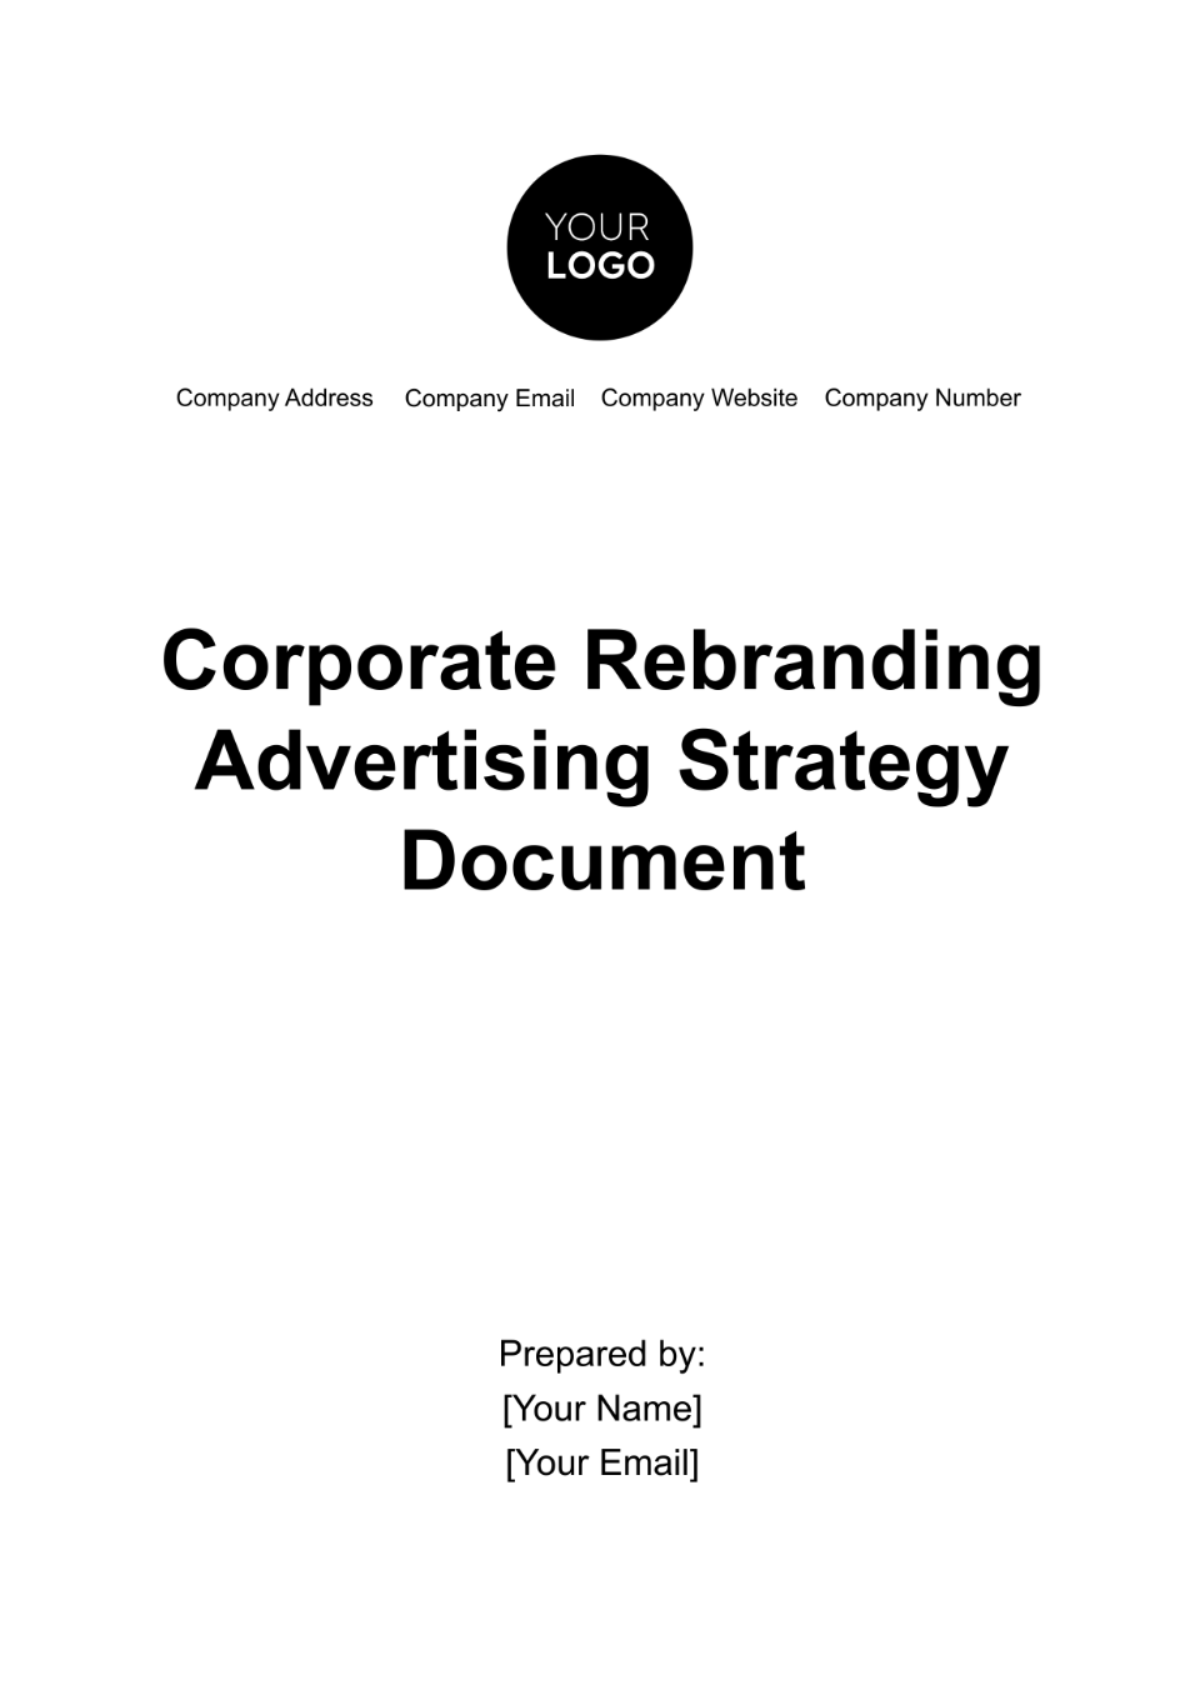 Free Corporate Rebranding Advertising Strategy Document Template